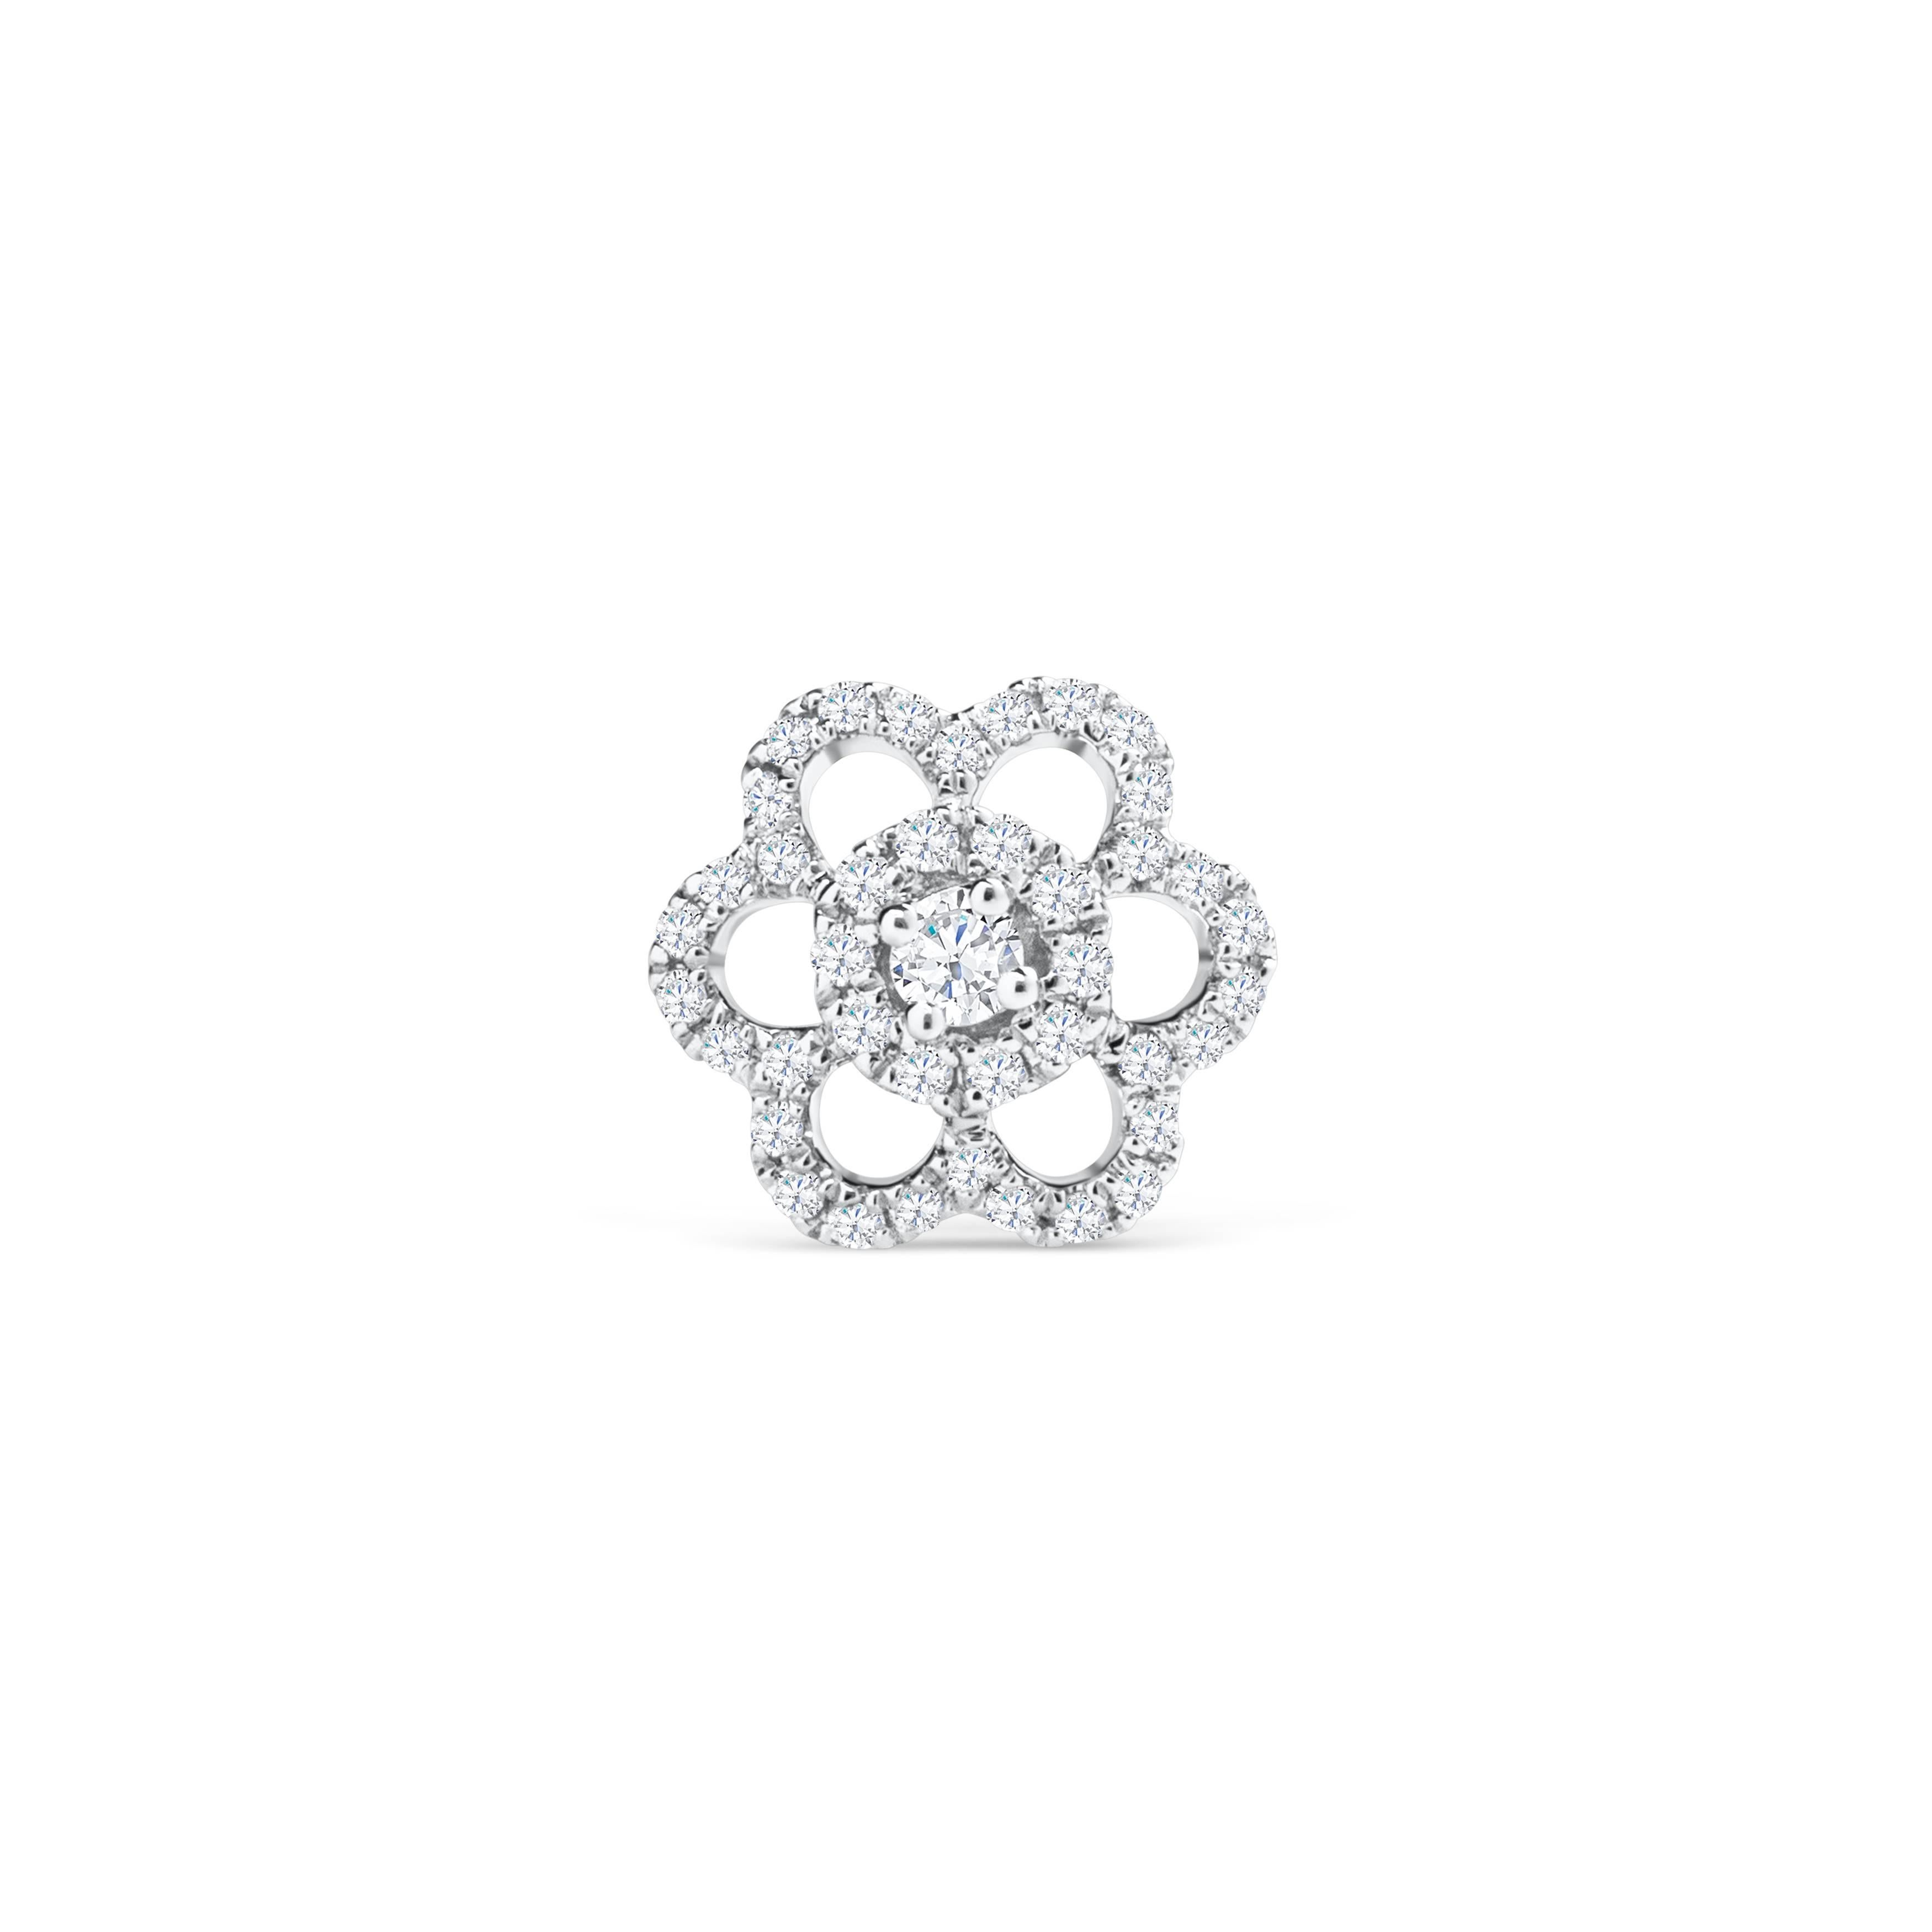 Stylish and chic, each earring showcases a round brilliant diamond center set in an intricate floral motif open work design. Surrounding the diamond center are sparkling round melee diamonds in 18k white gold mounting. Weight of the diamonds is 0.32